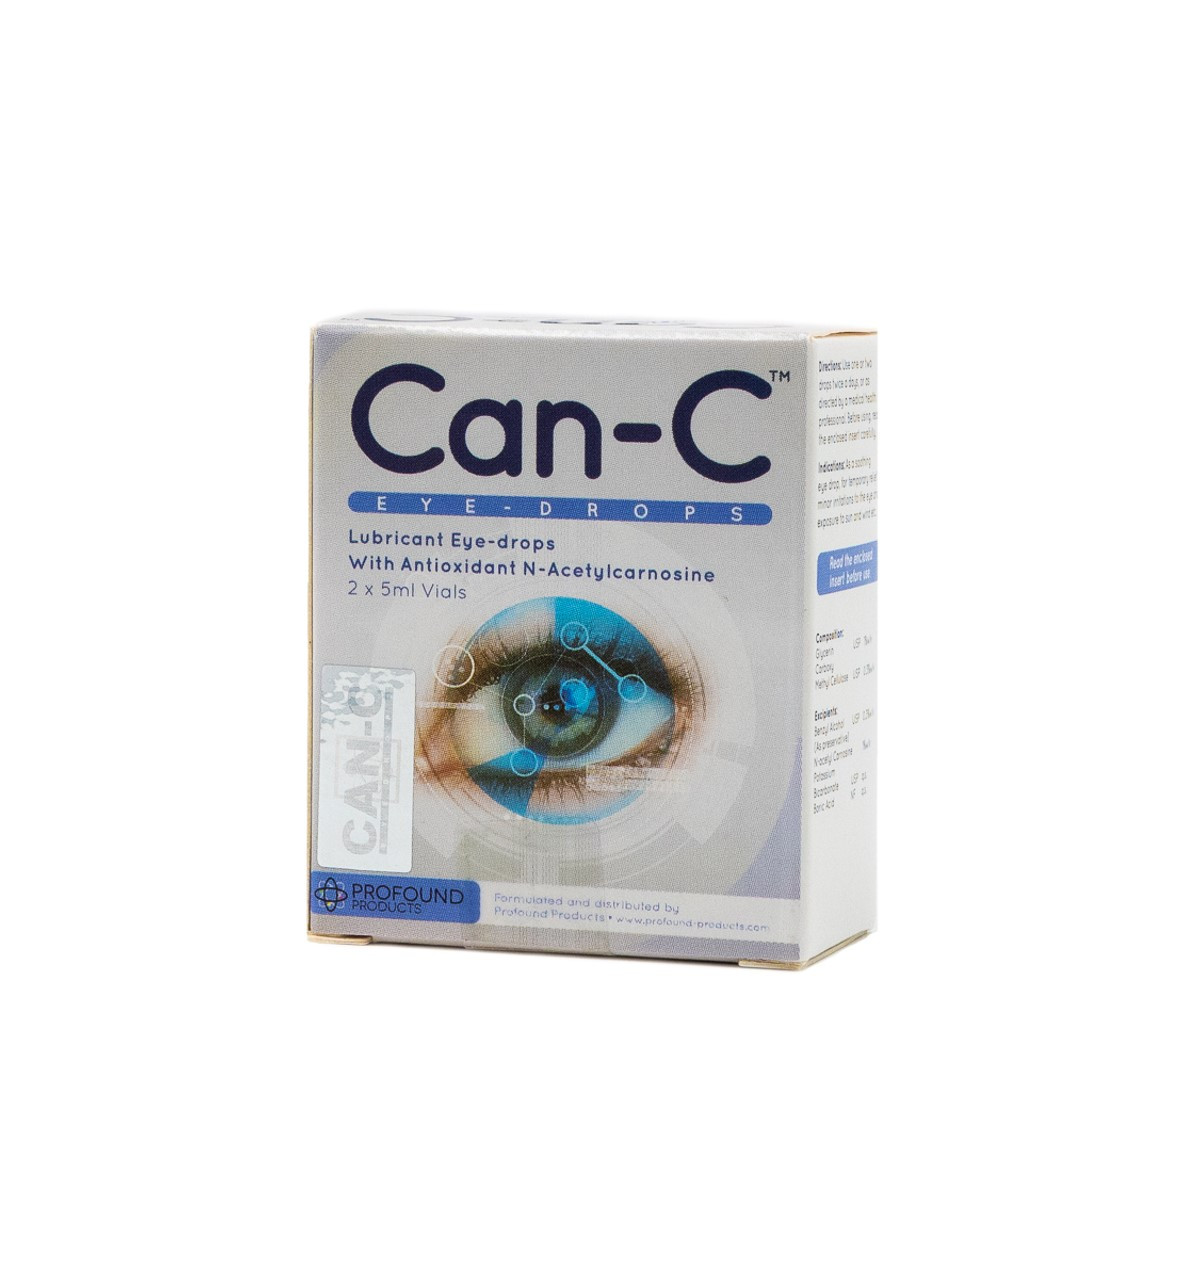 Ingredients of CAN-C Eye Drops for Cataracts